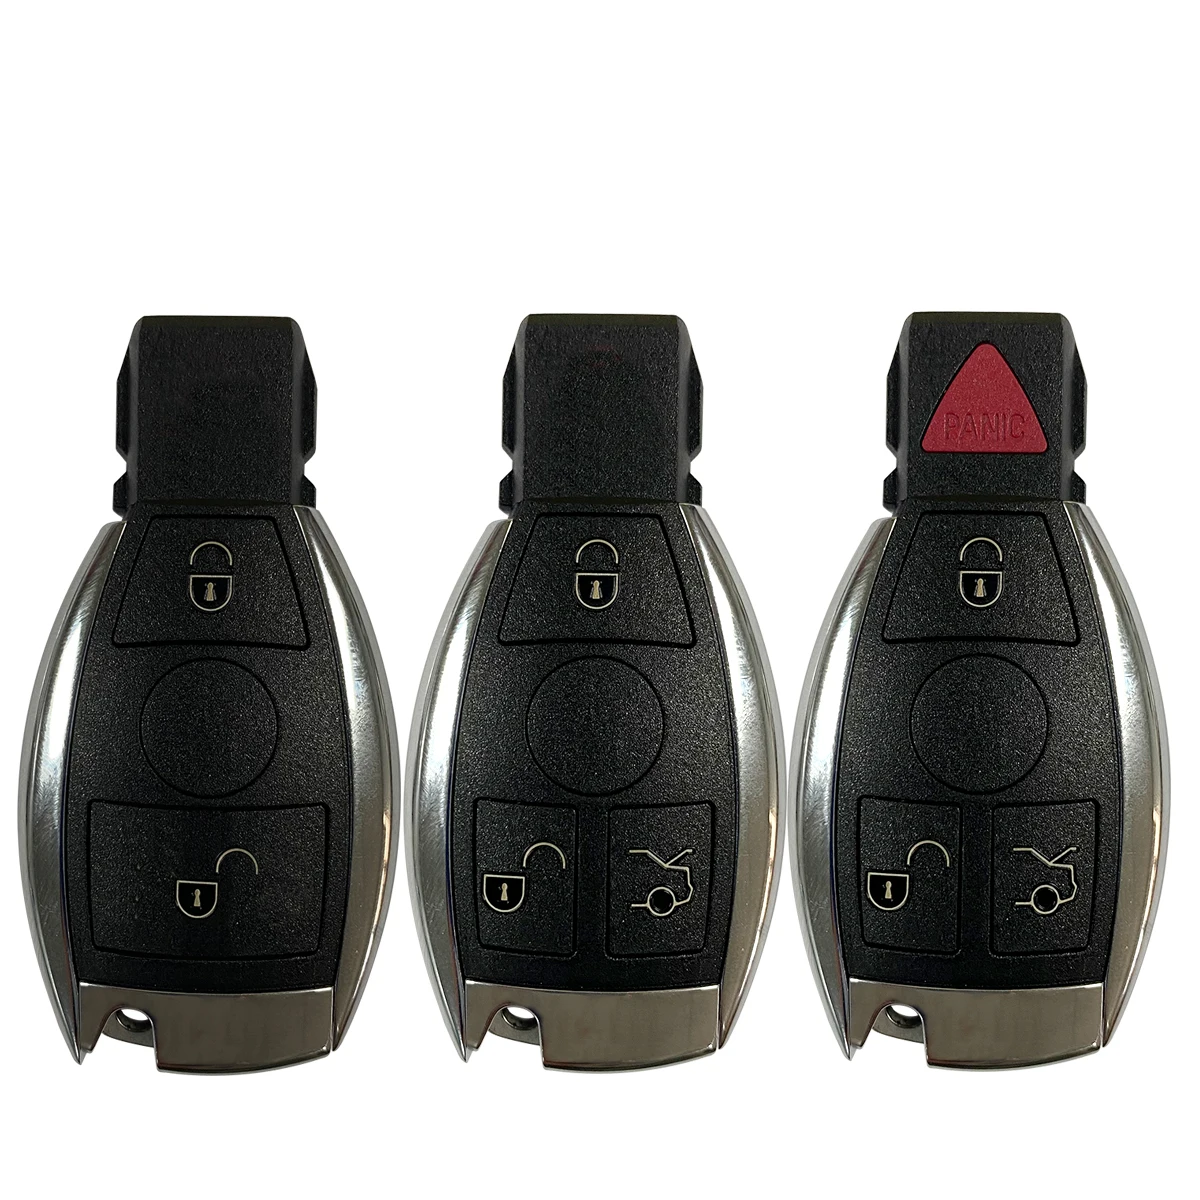 Okey Remote Control Car Key Shell Replacement  For Mercedes Benz Year 2000+ C E S Class Supports Original NEC/BGA  2/3/4 Buttons xnrkey 2 1 buttons remote smart car key for mercedes benz 2000 keyless remote 433mhz bga type card